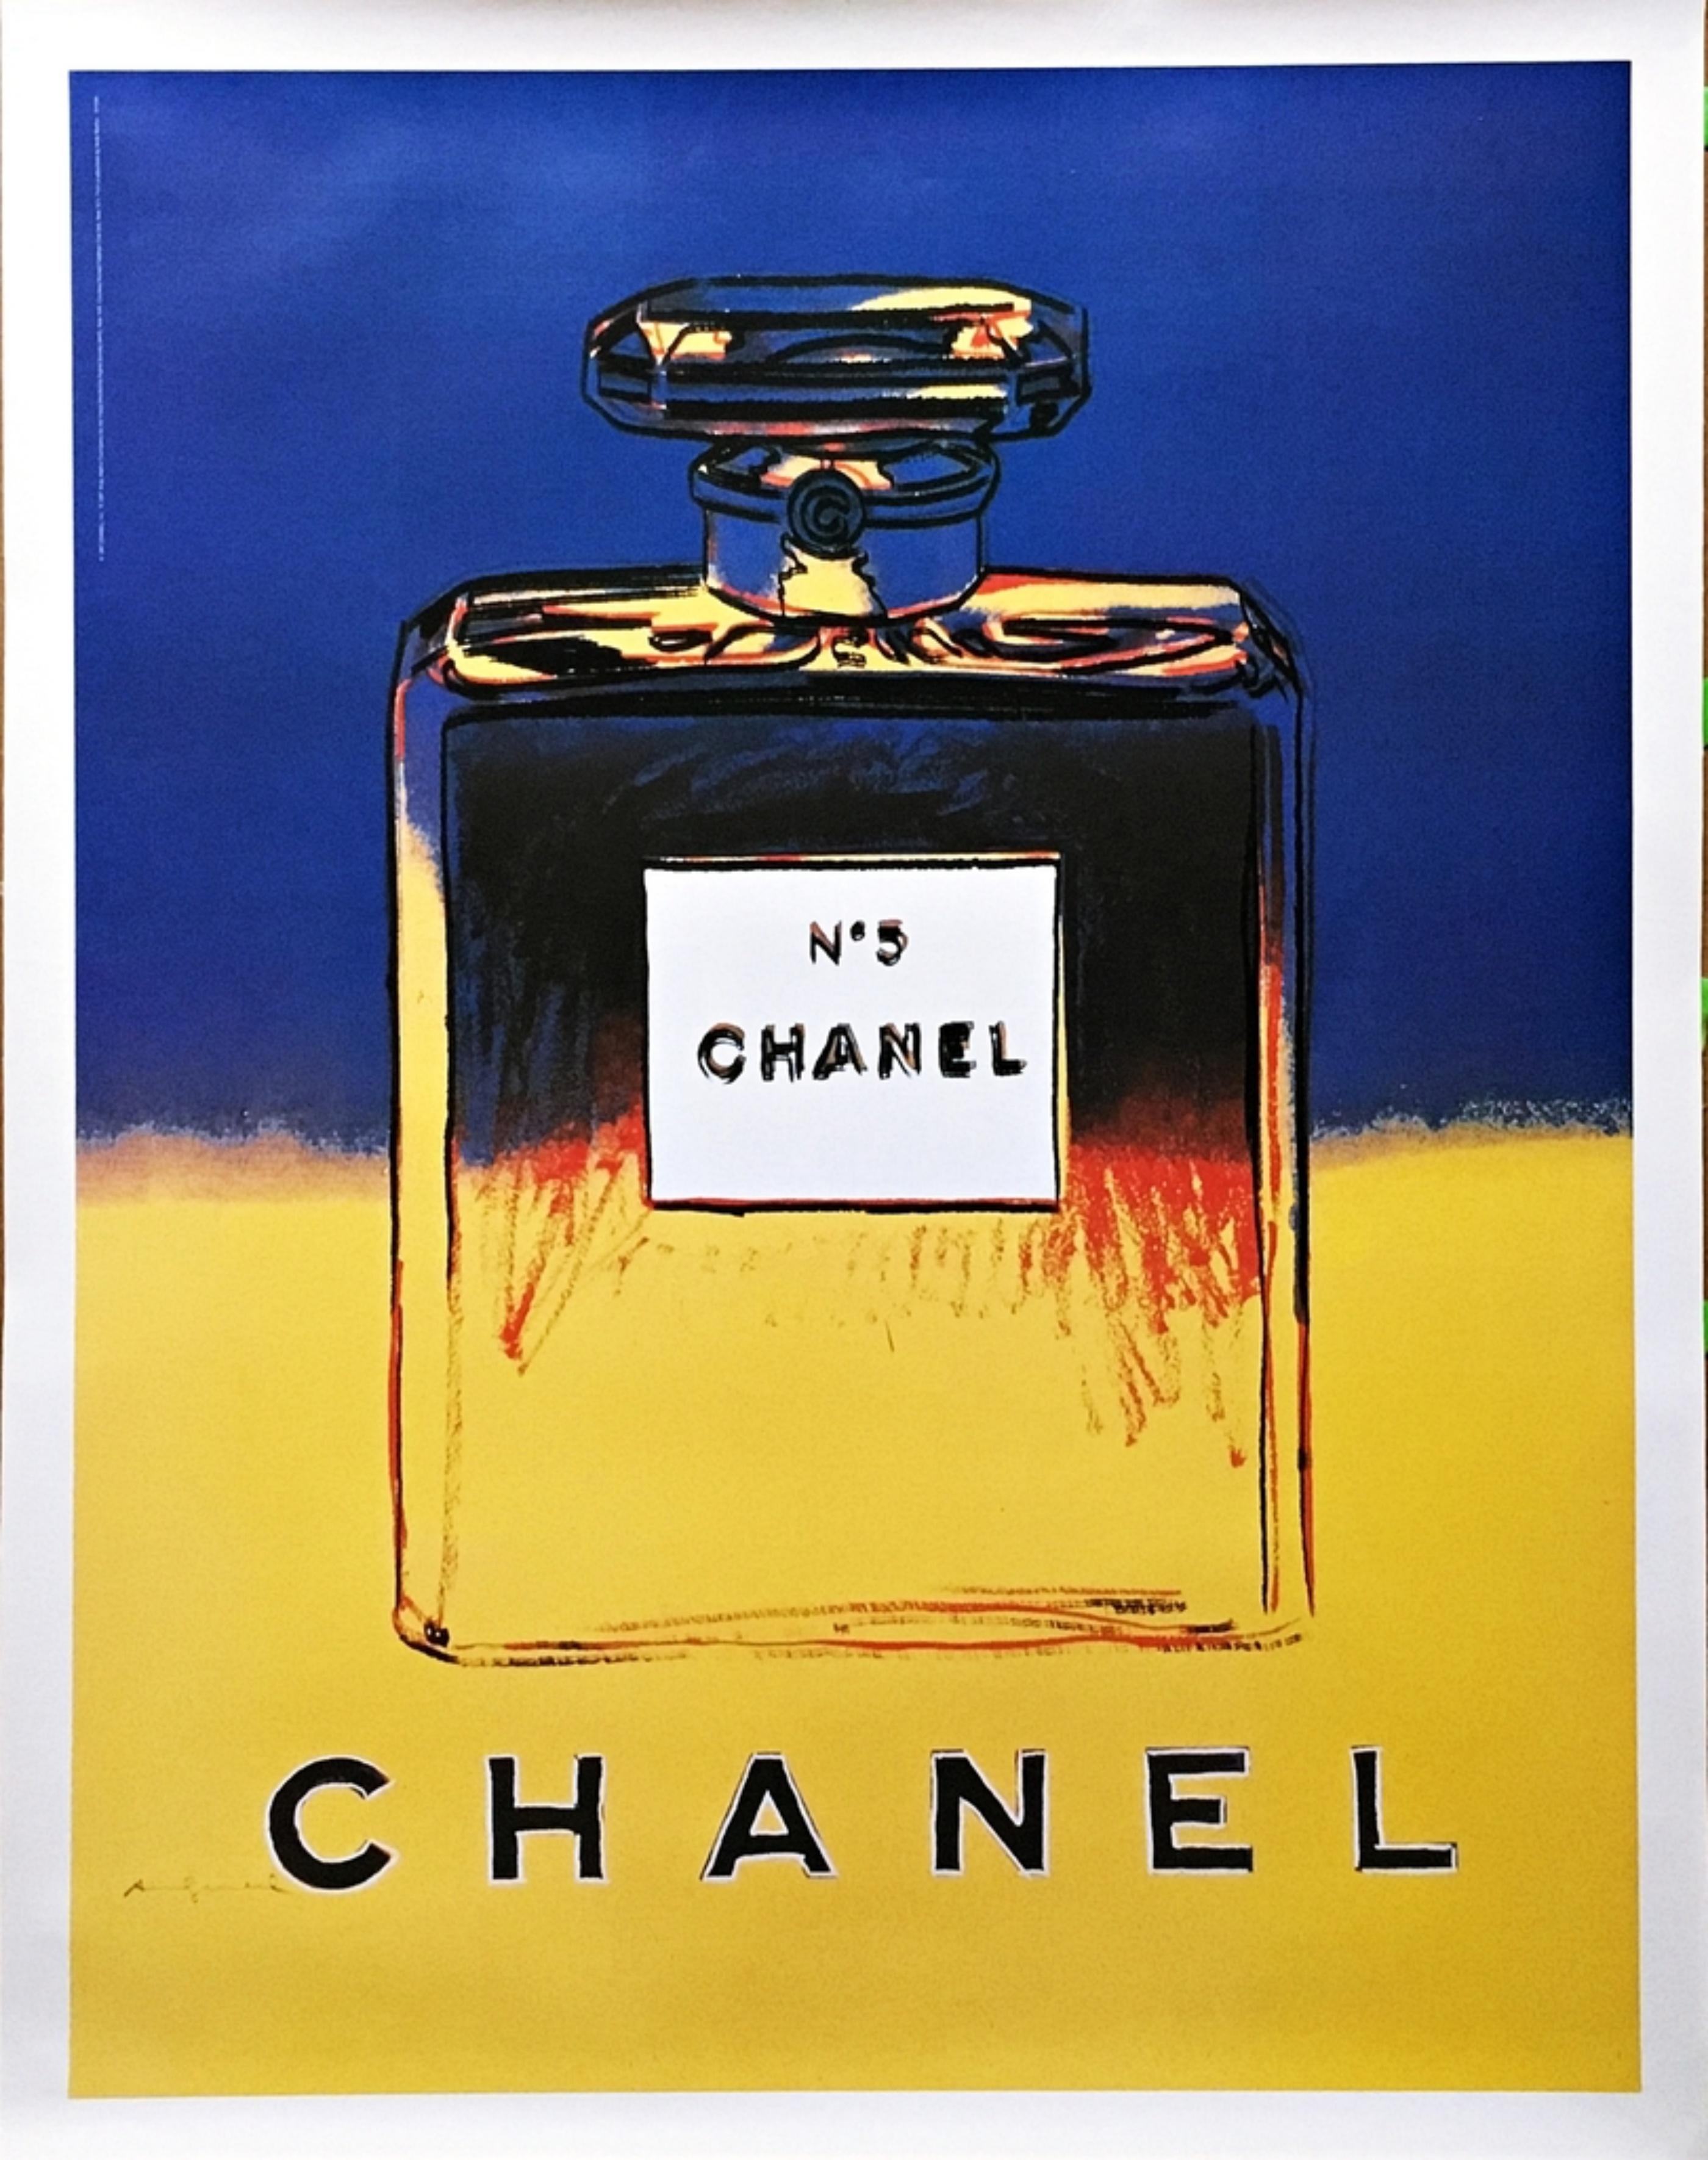 Andy Warhol
Chanel No. 5 (Suite of Four Individual (Separate) Prints on Linen Canvas), 1996
Suite of Four (4) Separate Individual Limited Edition Offset lithographs in colors on wove paper affixed to elegant thin linen canvas backing, 
Each plate